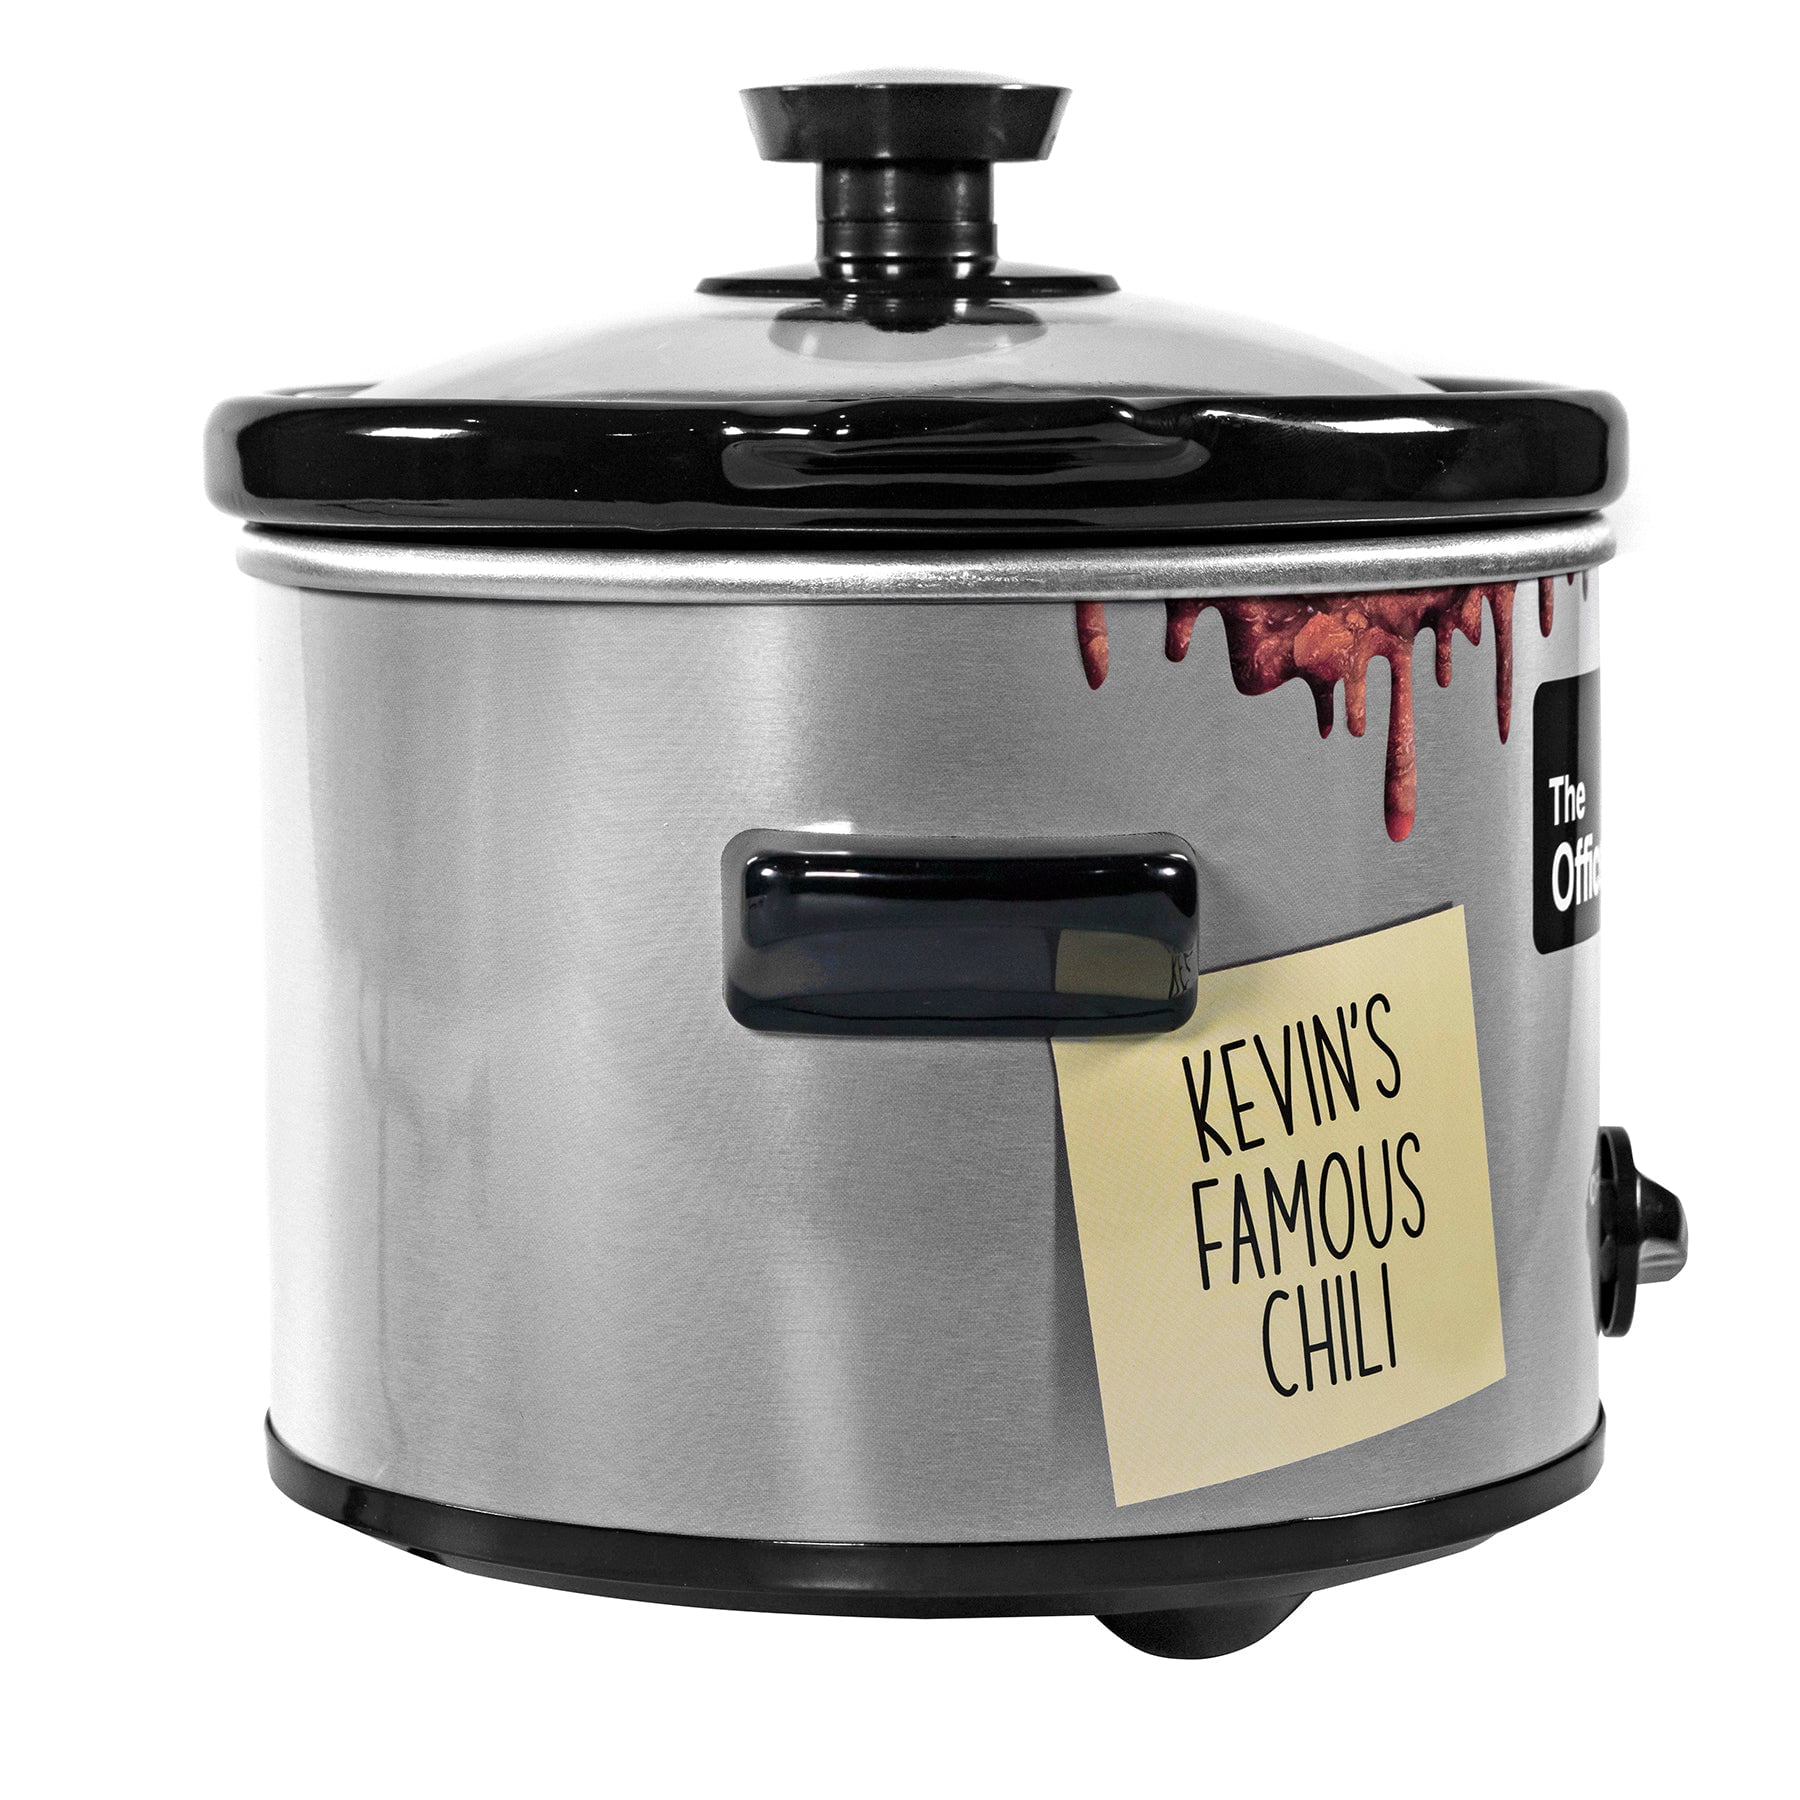 The Office Kevin's Famous Chili Slow Cooker